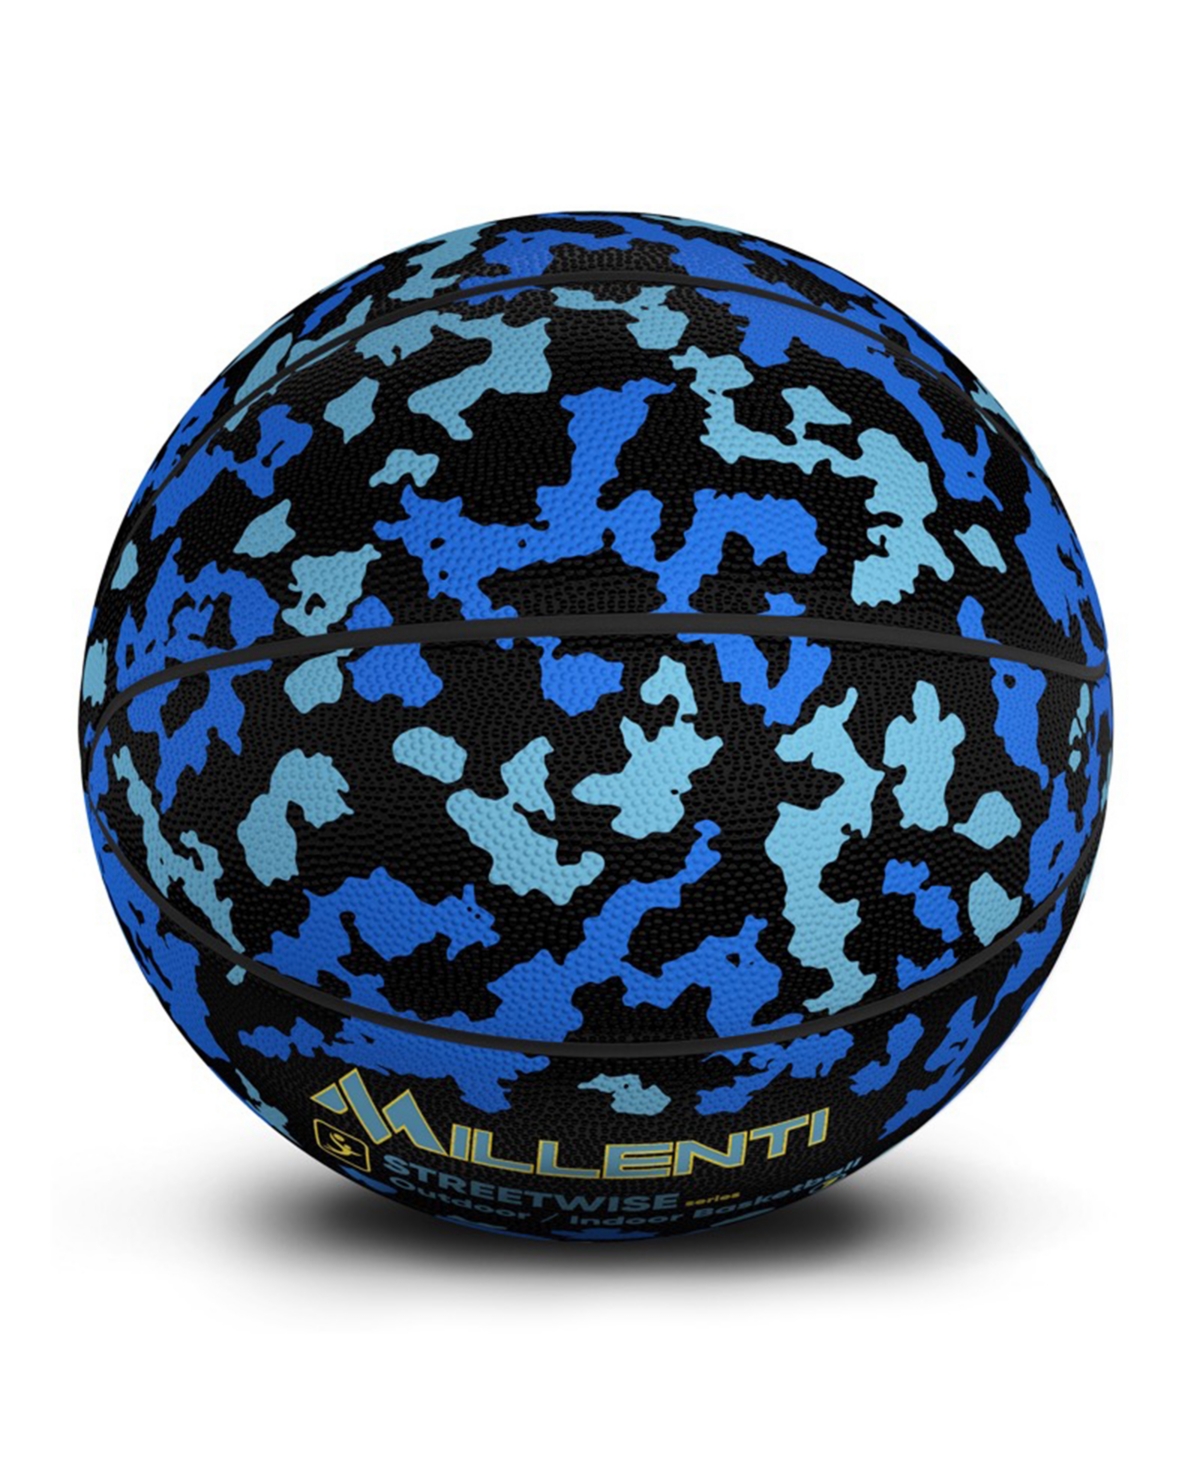 Millenti Basketball Official Size 7 Outdoor Indoor Ball Street Wise Adult Sized Basketball For Men And Women In Blue